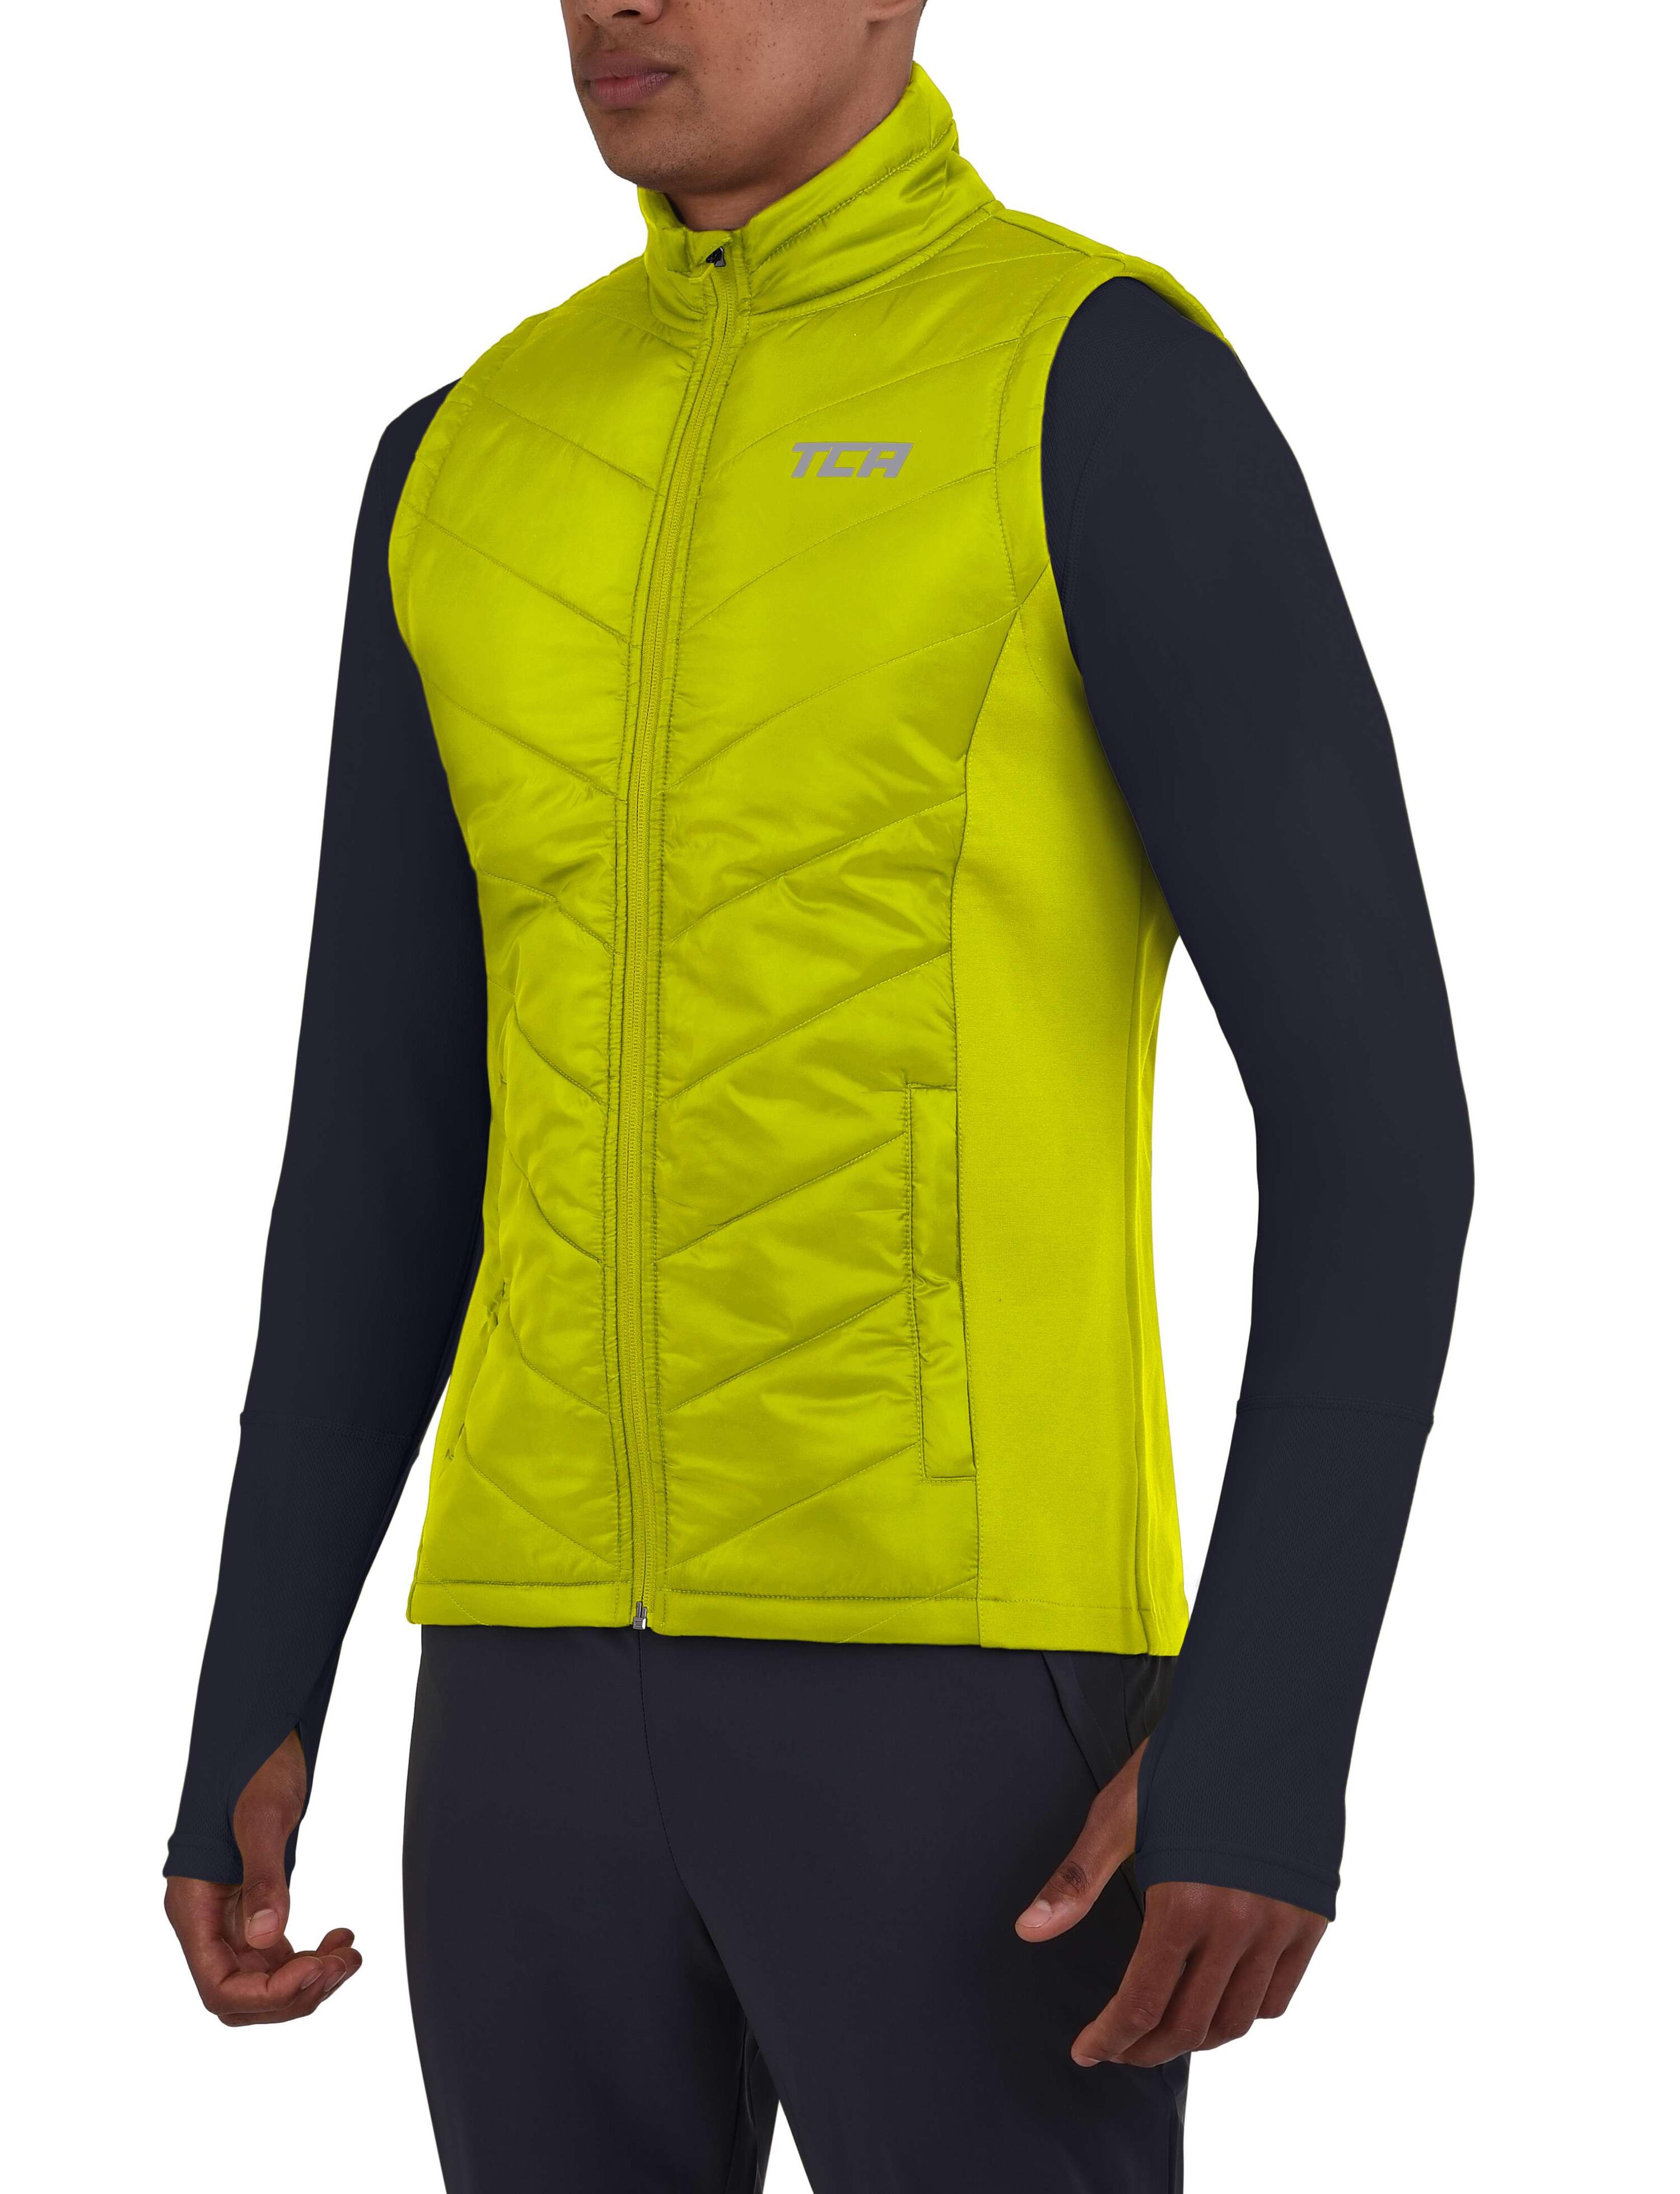 Men's Excel Winter Gilet with Zip Pockets - Lime Punch 2/5